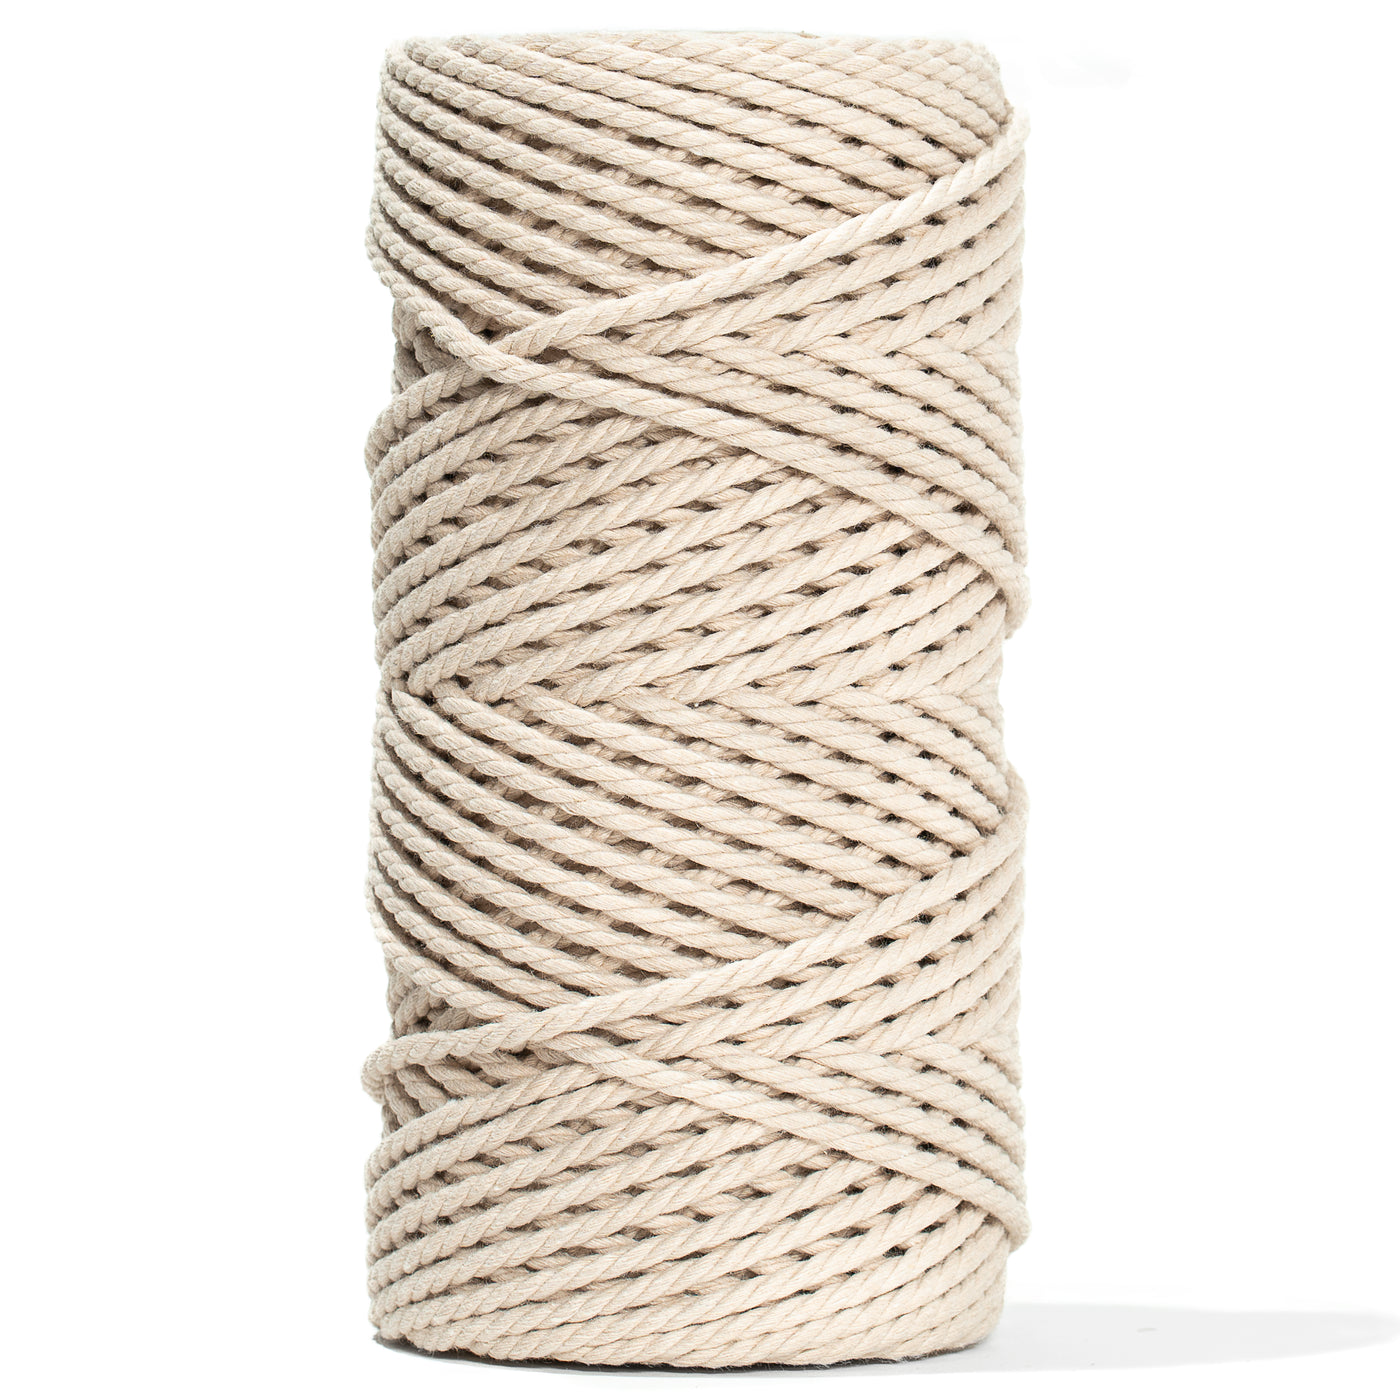 COTTON ROPE ZERO WASTE 3 MM - 3 PLY - ALMOND COLOR